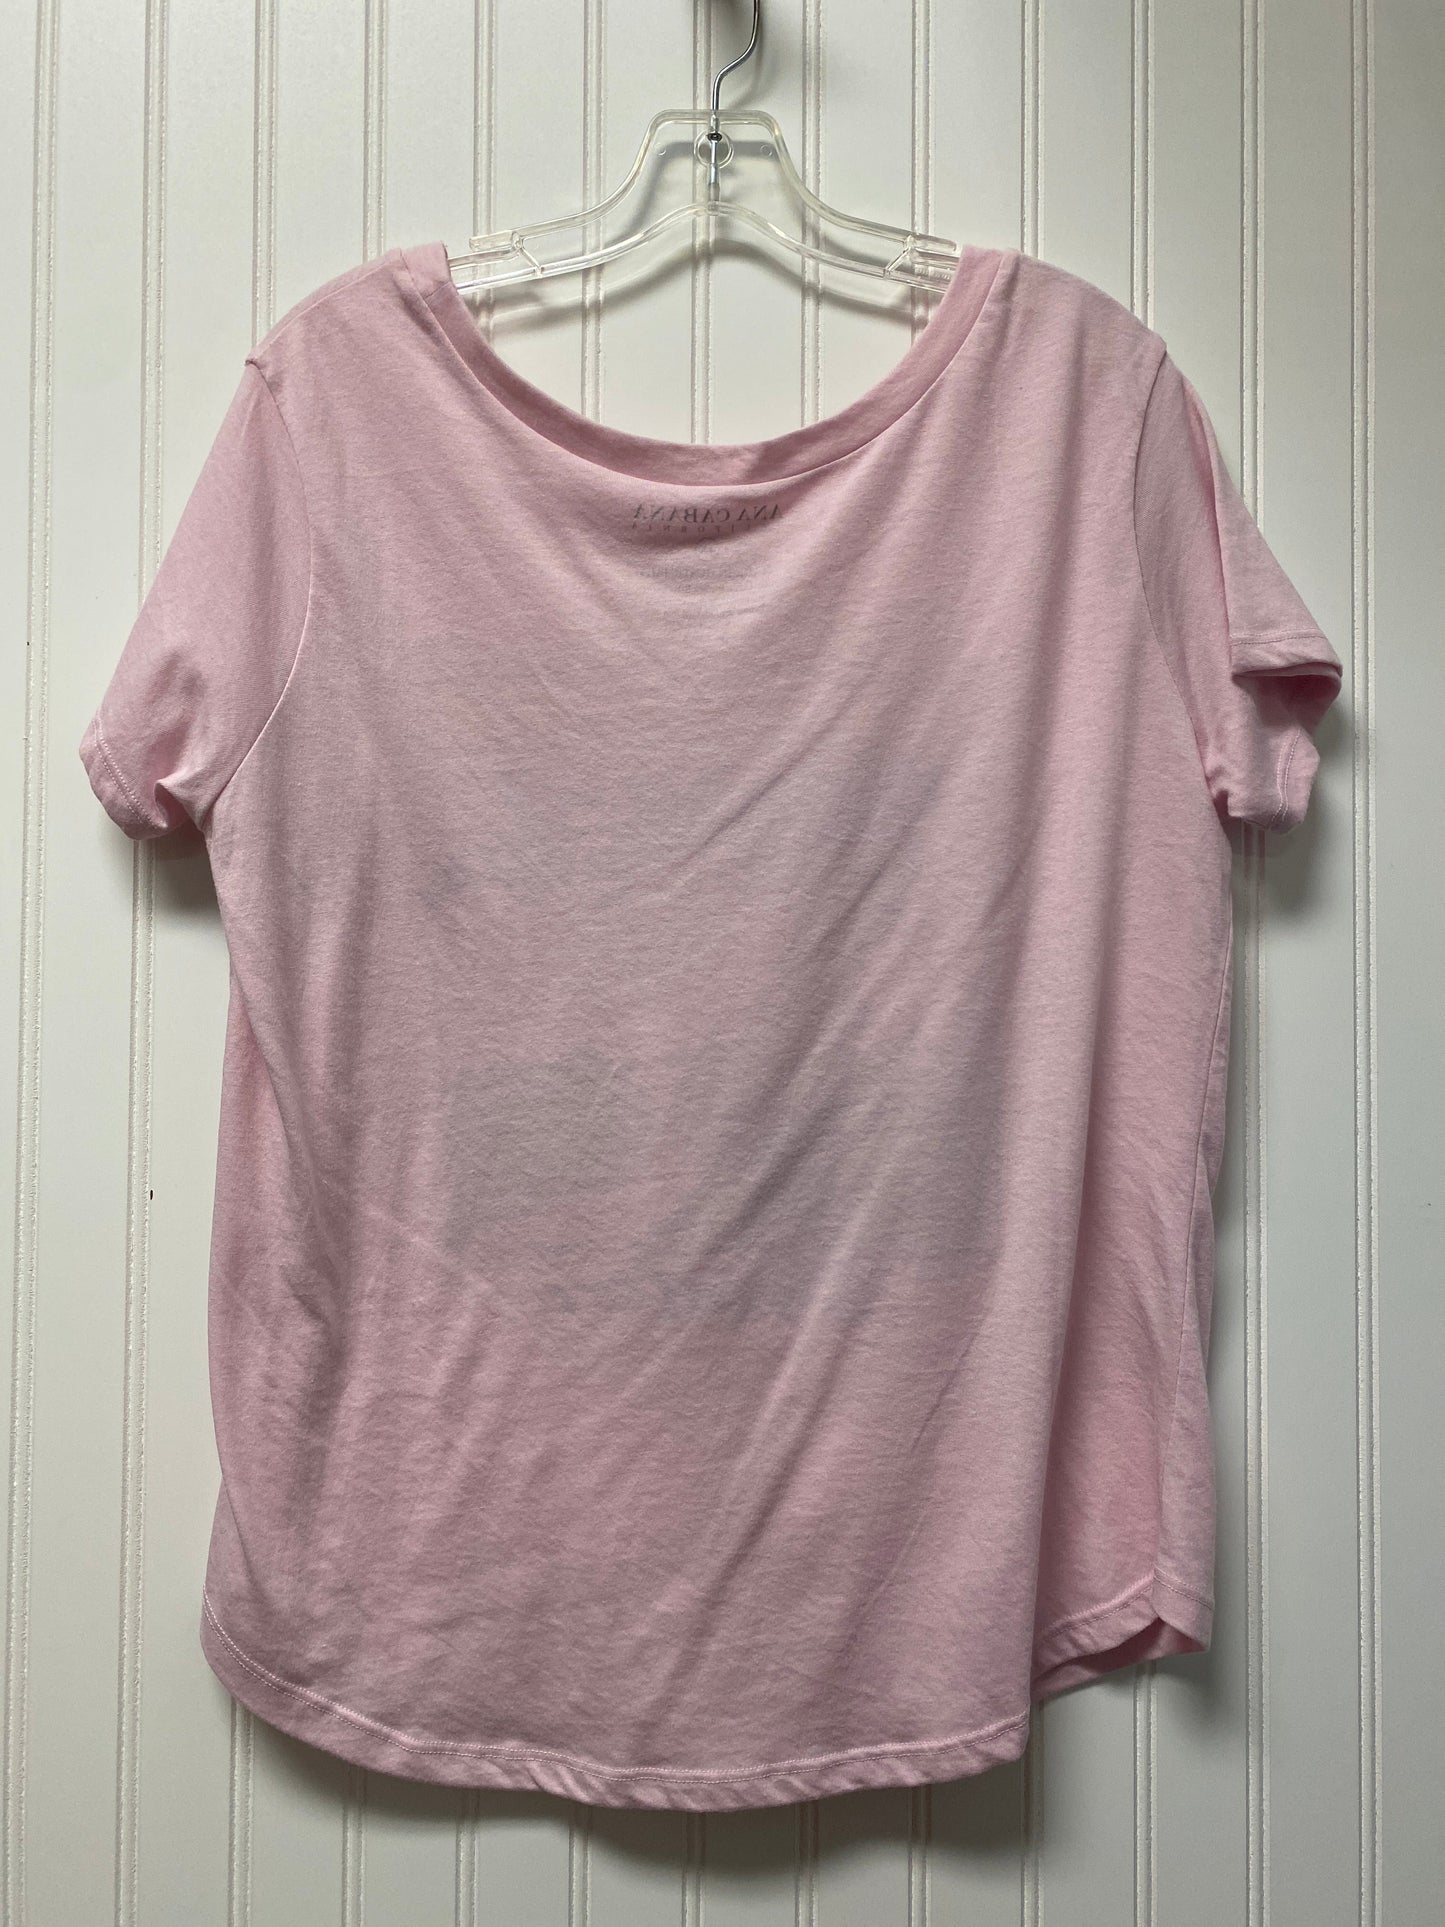 Pink Top Short Sleeve Clothes Mentor, Size 1x